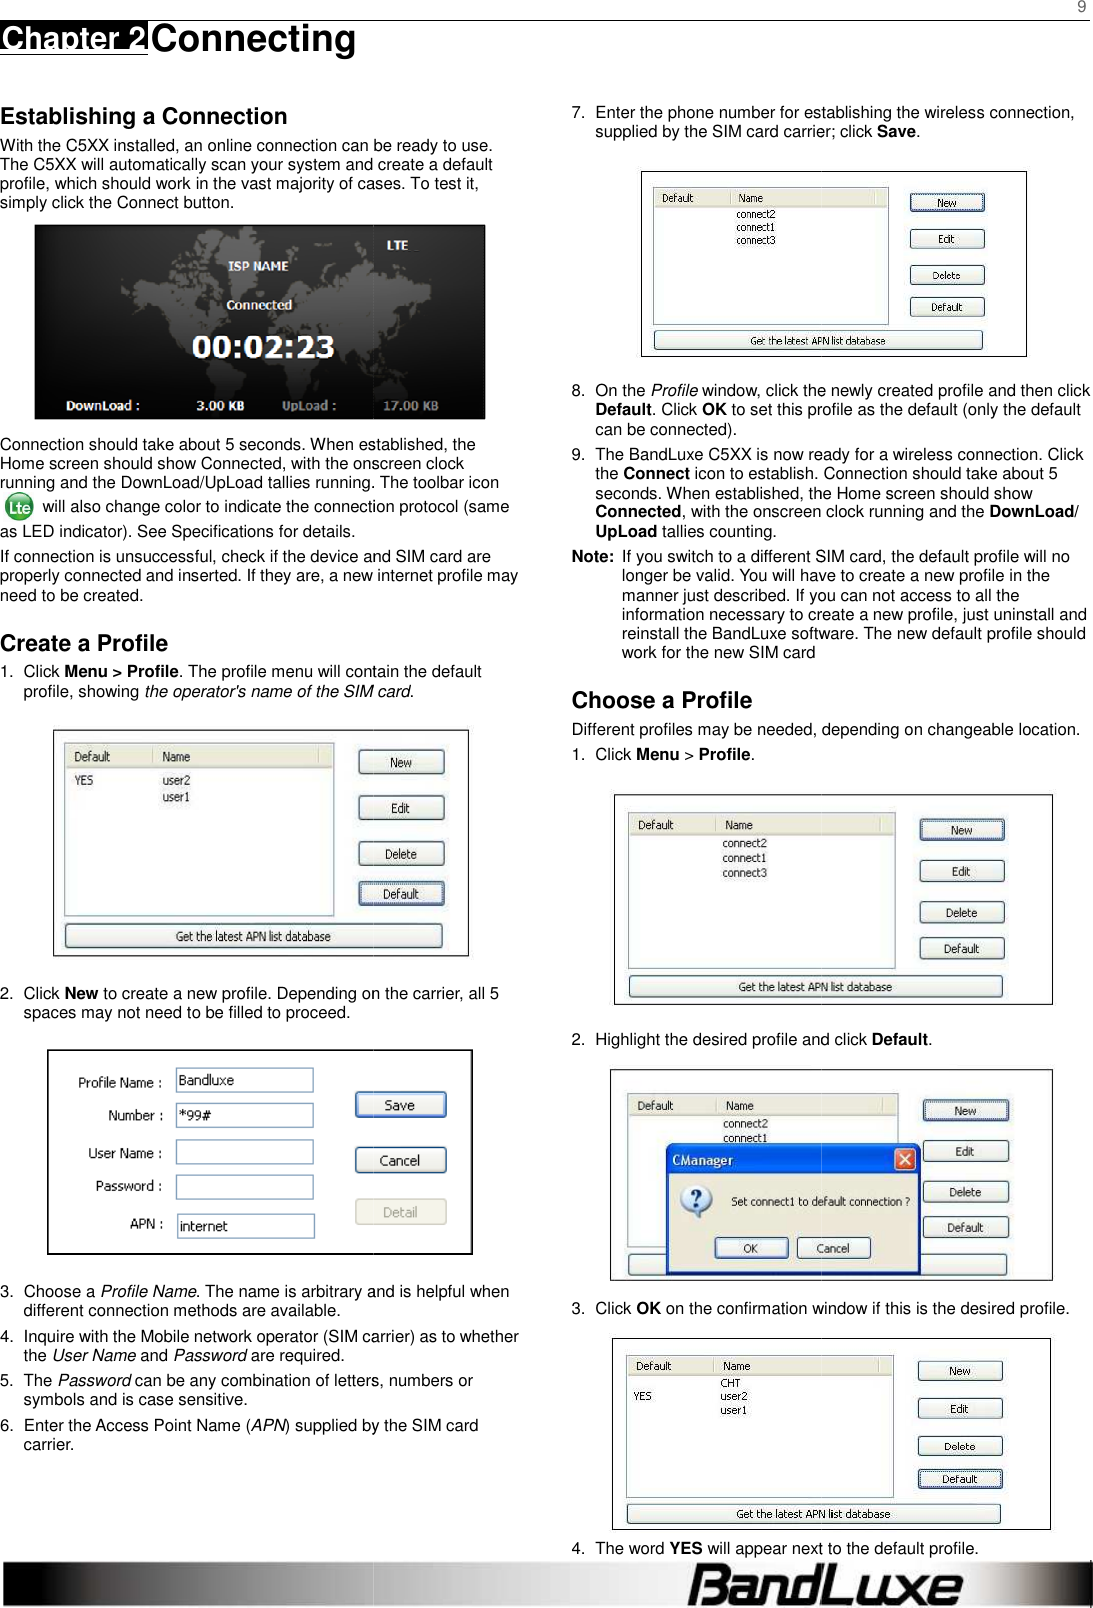    Chapter 2 Connecting     Establishing a Connection With the C5XX installed, an online connection can beThe C5XX will automatically scan your system and create a default profile, which should work in the vast majority of cases. To test it, simply click the Connect button.   Connection should take about 5 seconds. When established, the Home screen should show Connected, with the onscreen clock running and the DownLoad/UpLoad tallies running. The toolbar icon  will also change color to indicate the connection protocol (same as LED indicator). See Specifications for details. If connection is unsuccessful, check if the device and SIM card are properly connected and inserted. If they are, a new internet profile may need to be created. Create a Profile 1.  Click Menu &gt; Profile. The profile menu will contain the default profile, showing the operator&apos;s name of the SIM card2.  Click New to create a new profile. Depending on the carrier, all spaces may not need to be filled to proceed. 3.  Choose a Profile Name. The name is arbitrary and is helpful when different connection methods are available. 4. Inquire with the Mobile network operator (SIM carrier) as to whether the User Name and Password are required. 5.  The Password can be any combination of letters, numbers or symbols and is case sensitive. 6.  Enter the Access Point Name (APN) supplied bycarrier.        can be ready to use. will automatically scan your system and create a default profile, which should work in the vast majority of cases. To test it,  Connection should take about 5 seconds. When established, the Connected, with the onscreen clock oad tallies running. The toolbar icon will also change color to indicate the connection protocol (same the device and SIM card are properly connected and inserted. If they are, a new internet profile may . The profile menu will contain the default operator&apos;s name of the SIM card.  to create a new profile. Depending on the carrier, all 5  . The name is arbitrary and is helpful when Inquire with the Mobile network operator (SIM carrier) as to whether can be any combination of letters, numbers or supplied by the SIM card 7. Enter the phone number for establishing the wireless connection, supplied by the SIM card carrier; click 8.  On the Profile window, click the newly created profile and then click Default. Click OK to set this profile as the can be connected). 9.  The BandLuxe C5XX is now ready for a wireless connection. Click the Connect icon to establish. Connection should take about 5 seconds. When established, the Home screen should sConnected, with the onscreen clock running and the UpLoad tallies counting. Note: If you switch to a different SIM card, the default profile will no longer be valid. You will have to create a new profile in the manner just described. If you information necessary to create a new profile, reinstall the BandLuxe software. The new default profile should work for the new SIM card Choose a Profile Different profiles may be needed, depending on 1.  Click Menu &gt; Profile. 2. Highlight the desired profile and click 3.  Click OK on the confirmation window if this is the desired profile.4.  The word YES will appear next to the default profile.9  Enter the phone number for establishing the wireless connection, supplied by the SIM card carrier; click Save.  window, click the newly created profile and then click to set this profile as the default (only the default is now ready for a wireless connection. Click . Connection should take about 5 seconds. When established, the Home screen should show , with the onscreen clock running and the DownLoad/ If you switch to a different SIM card, the default profile will no longer be valid. You will have to create a new profile in the If you can not access to all the information necessary to create a new profile, just uninstall and software. The new default profile should  Different profiles may be needed, depending on changeable location.  Highlight the desired profile and click Default.  on the confirmation window if this is the desired profile.  will appear next to the default profile. 